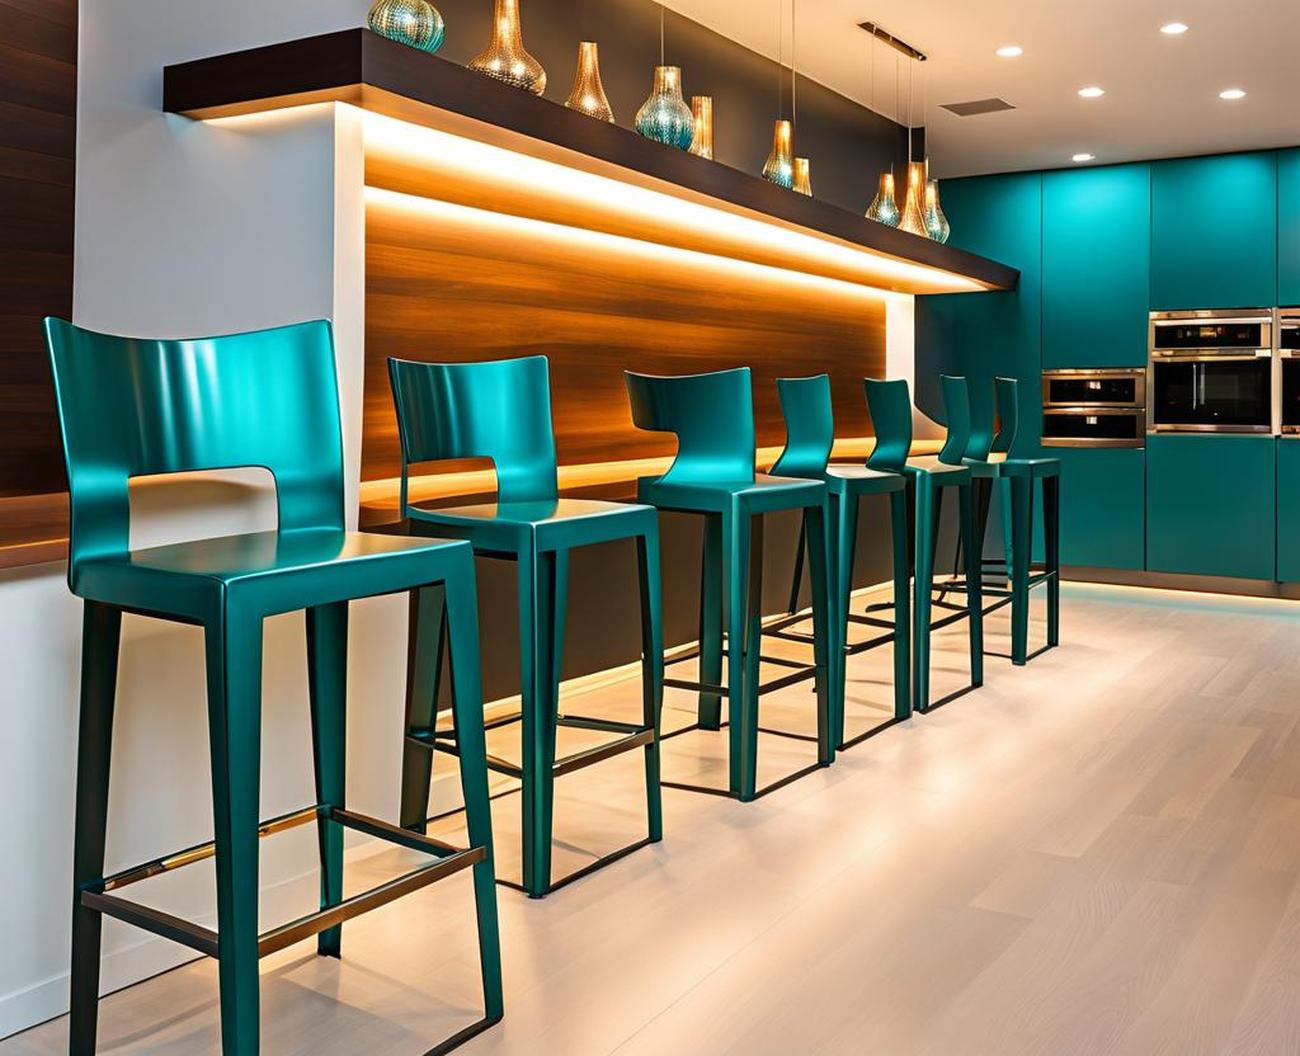 Stand Out with Flashy Powder-Coated Teal Bar Stools